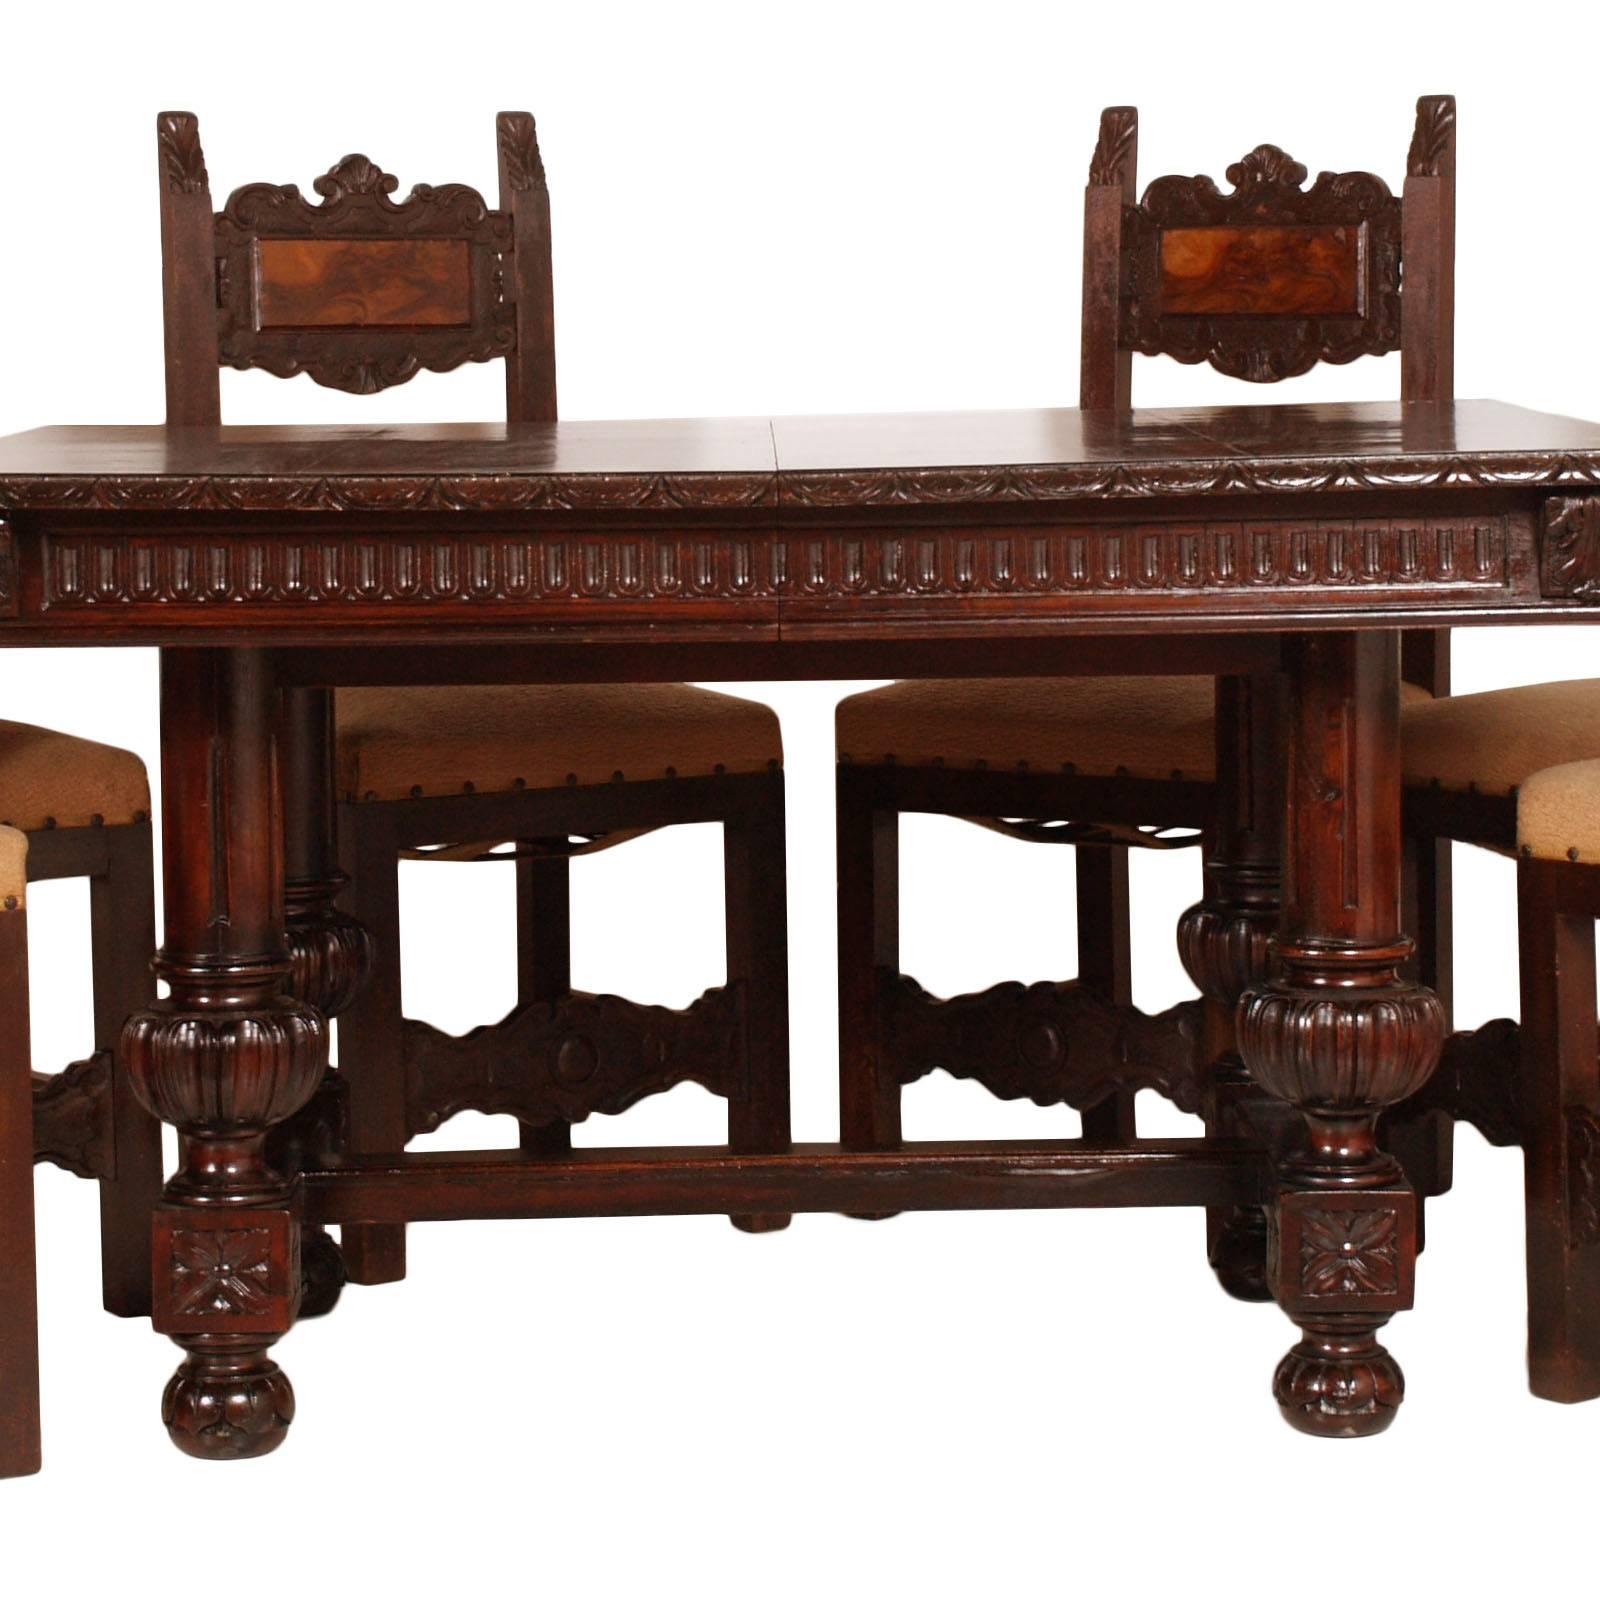 Italian Tuscany 19th Century Renaissance Table with Six Chairs, Hand-Carved Walnut For Sale